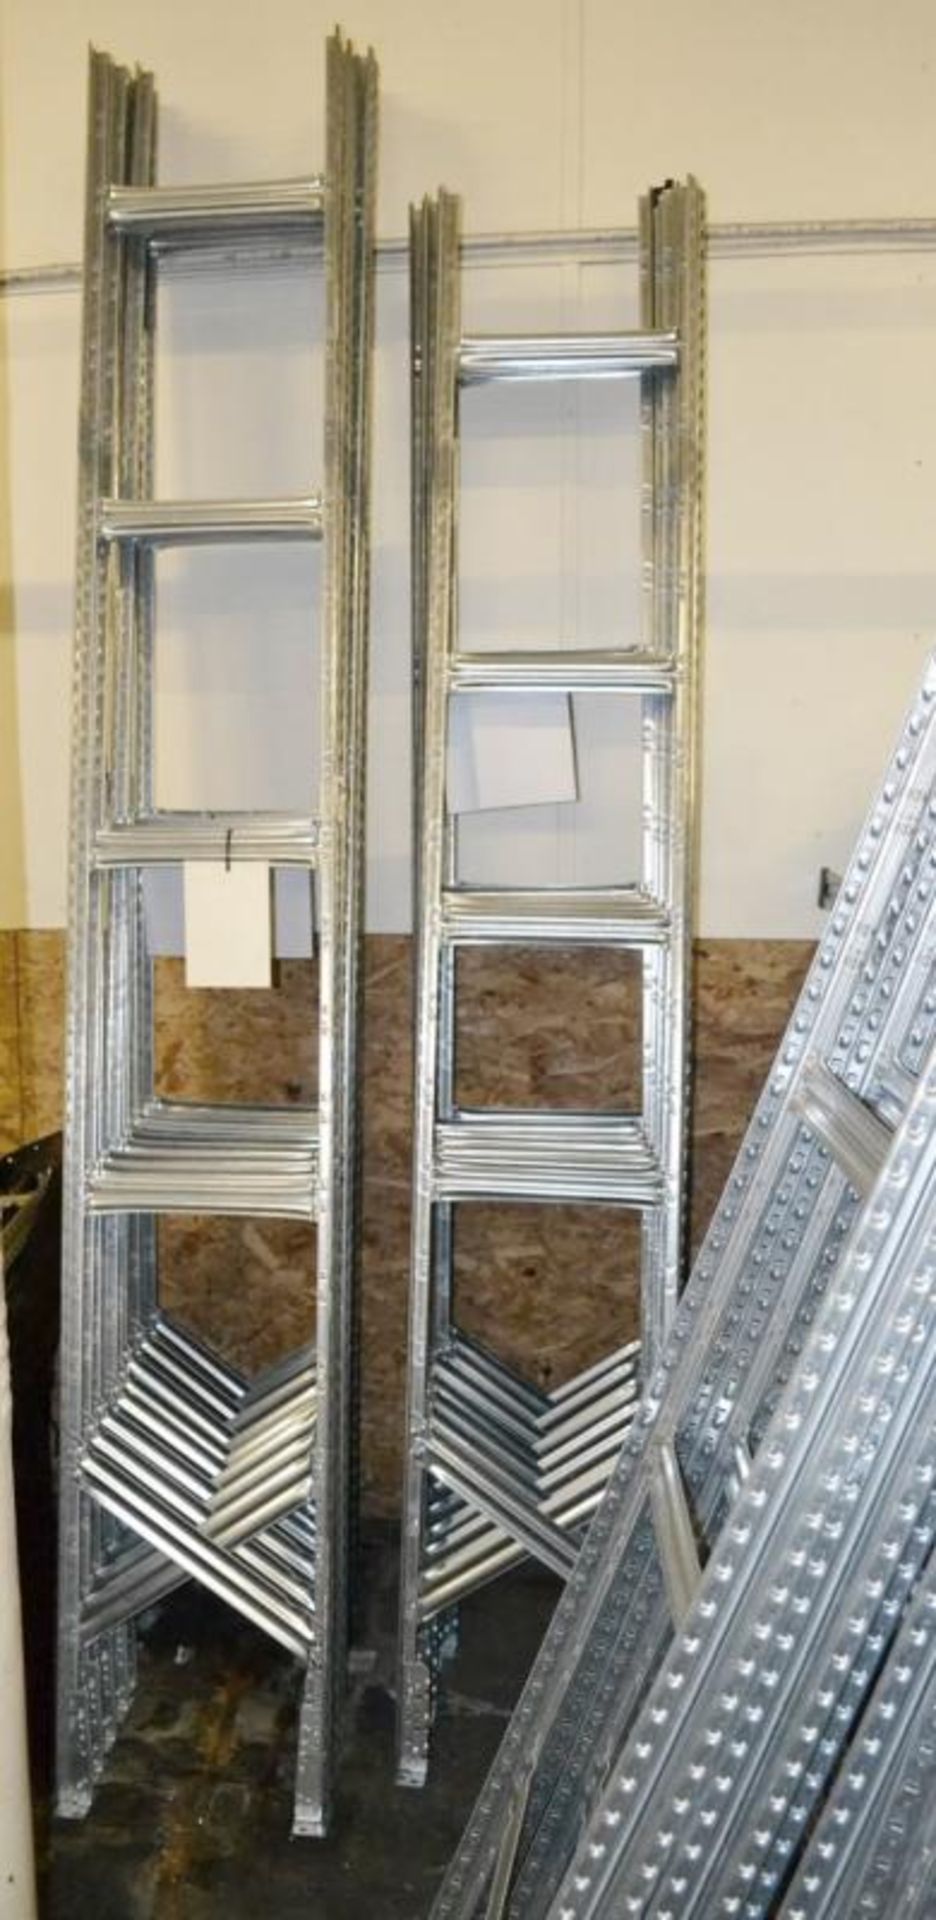 9 x Bays of Metalsistem Steel Modular Storage Shelving - Includes 58 Pieces - Recently Removed - Image 2 of 18